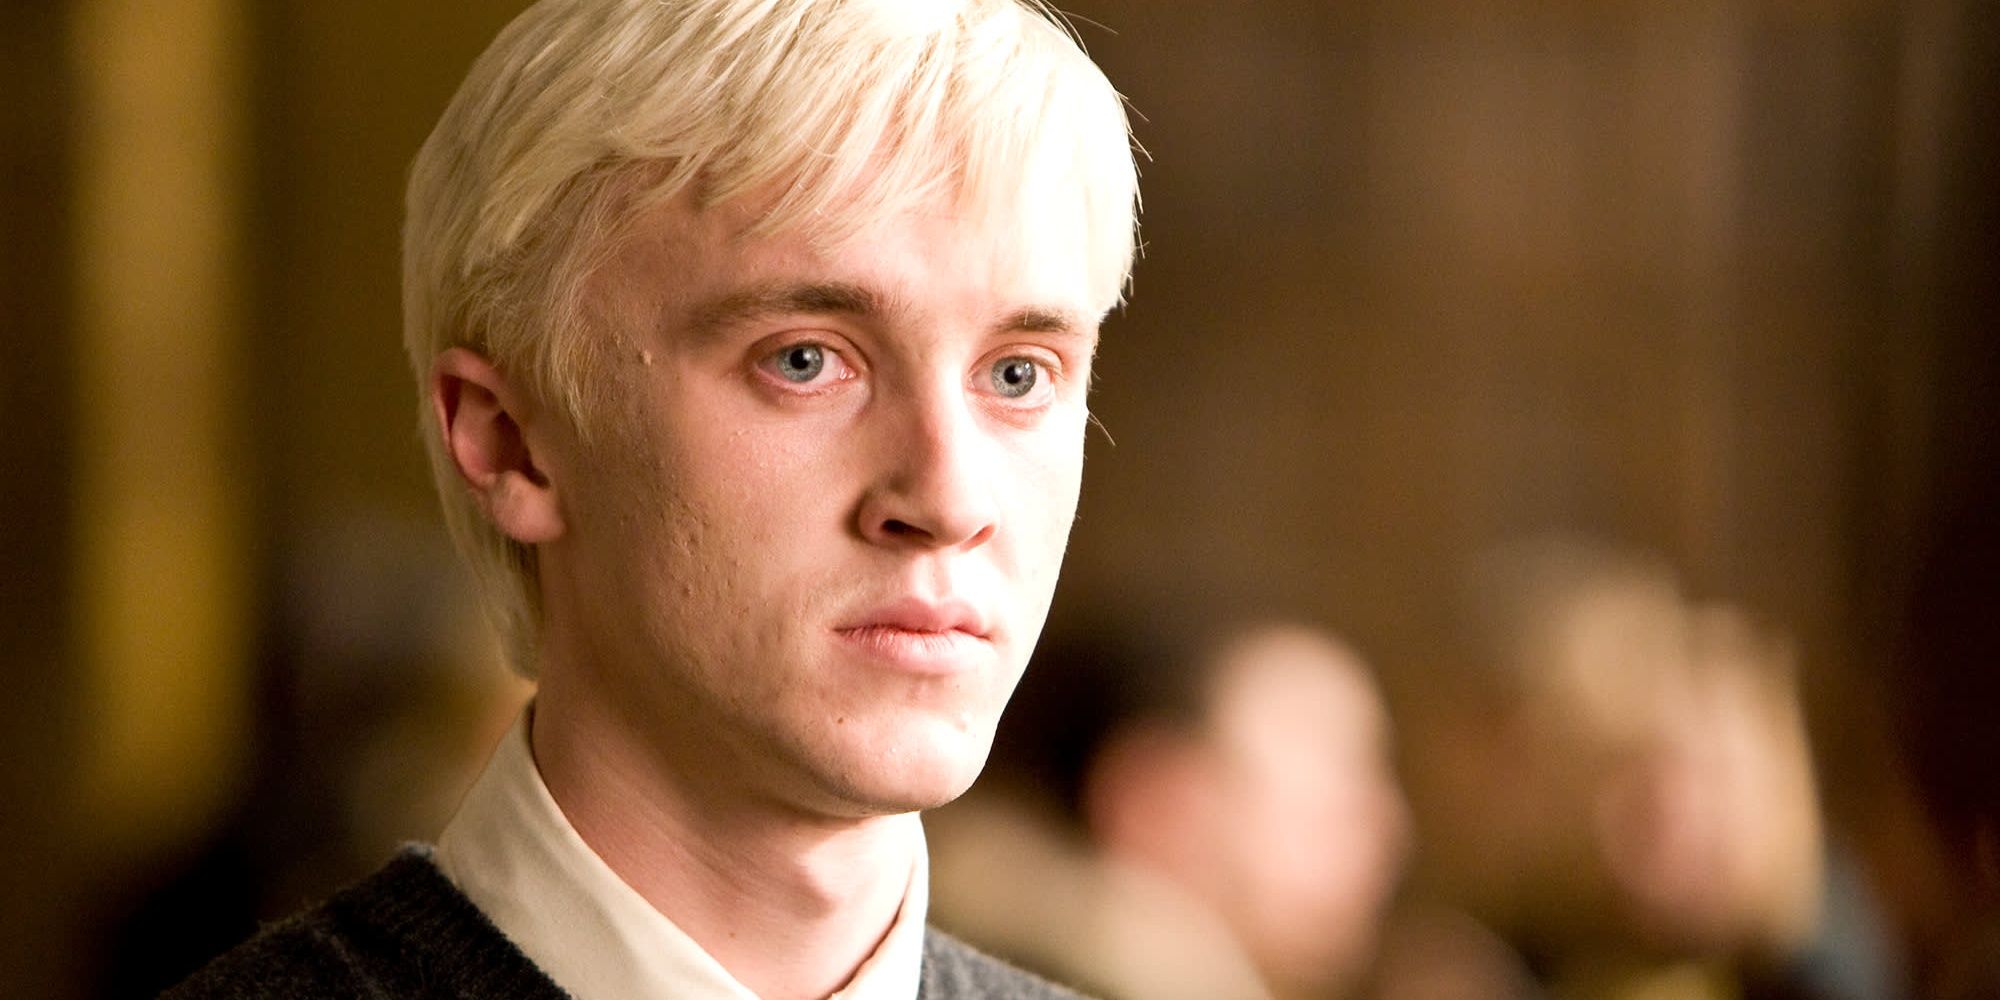 Draco Malfoy looks angry in Harry Potter and the Half-Blood Prince